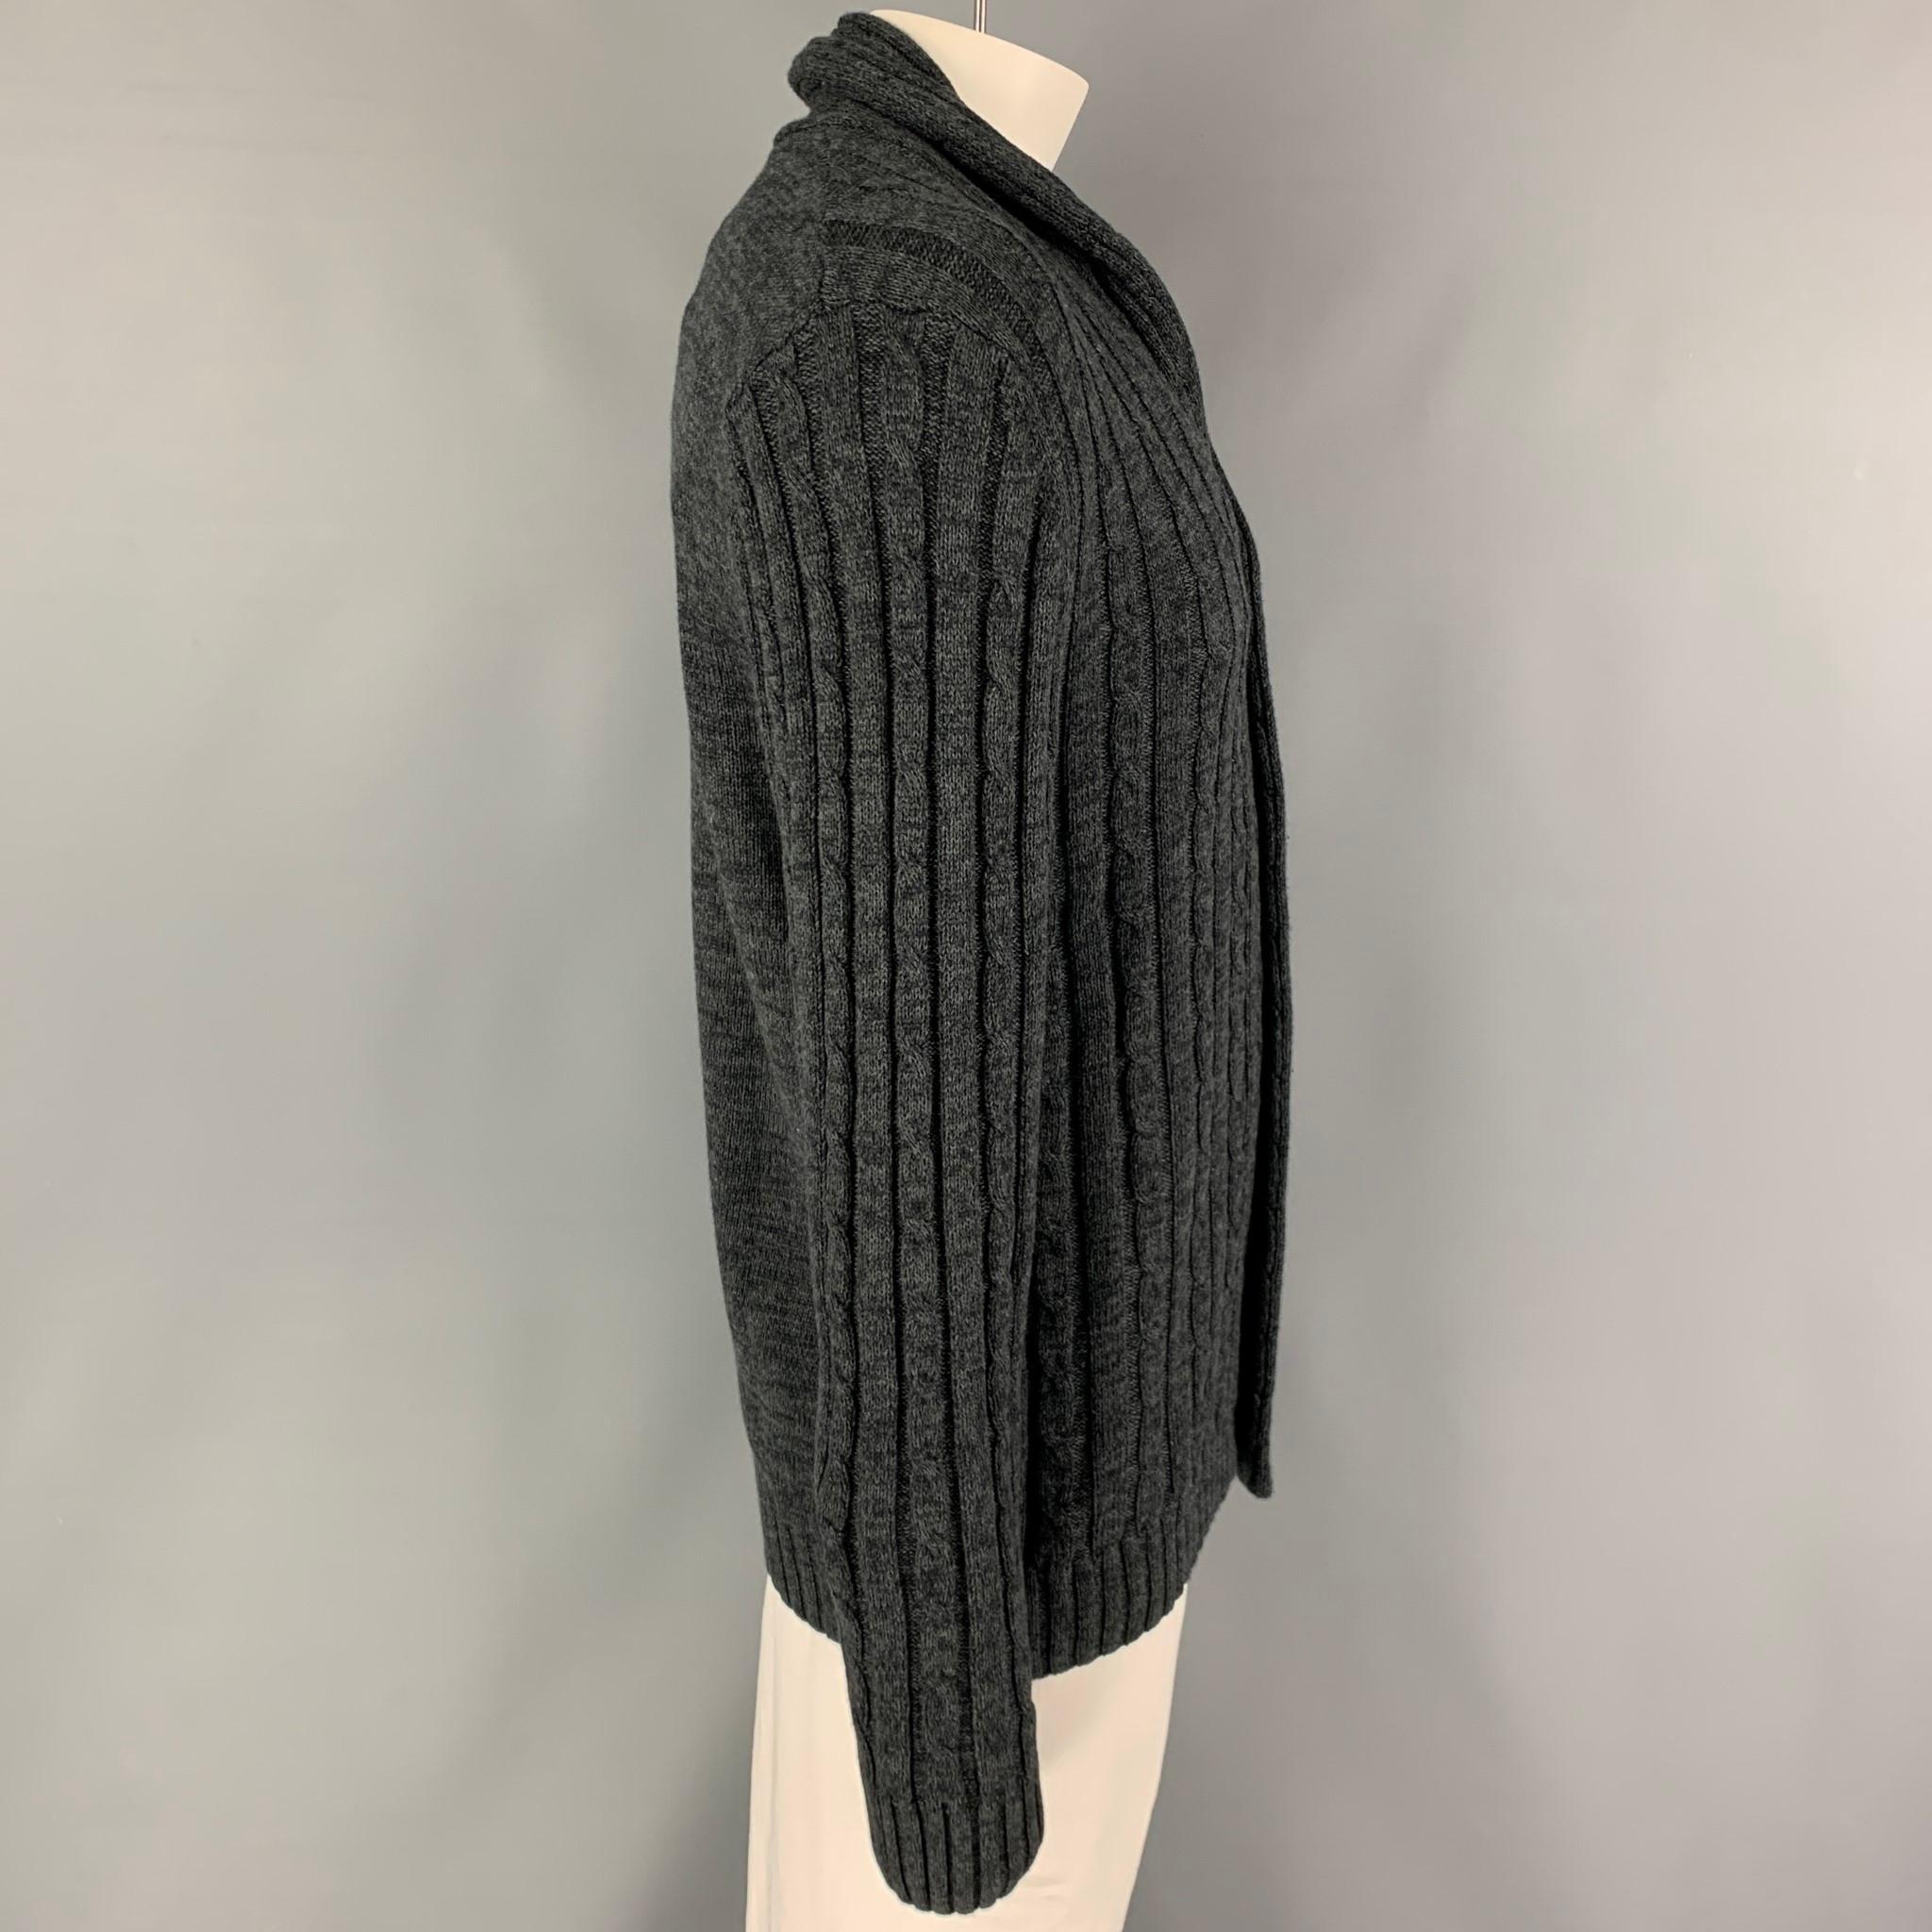 KITON cardigan comes in a grey knitted cotton featuring a shawl collar and a logo buttoned closure. Made in Italy.

New with tags. 
Marked: L/52

Measurements:

Shoulder: 18 in.
Chest: 42 in.
Sleeve: 29 in.
Length: 31 in.